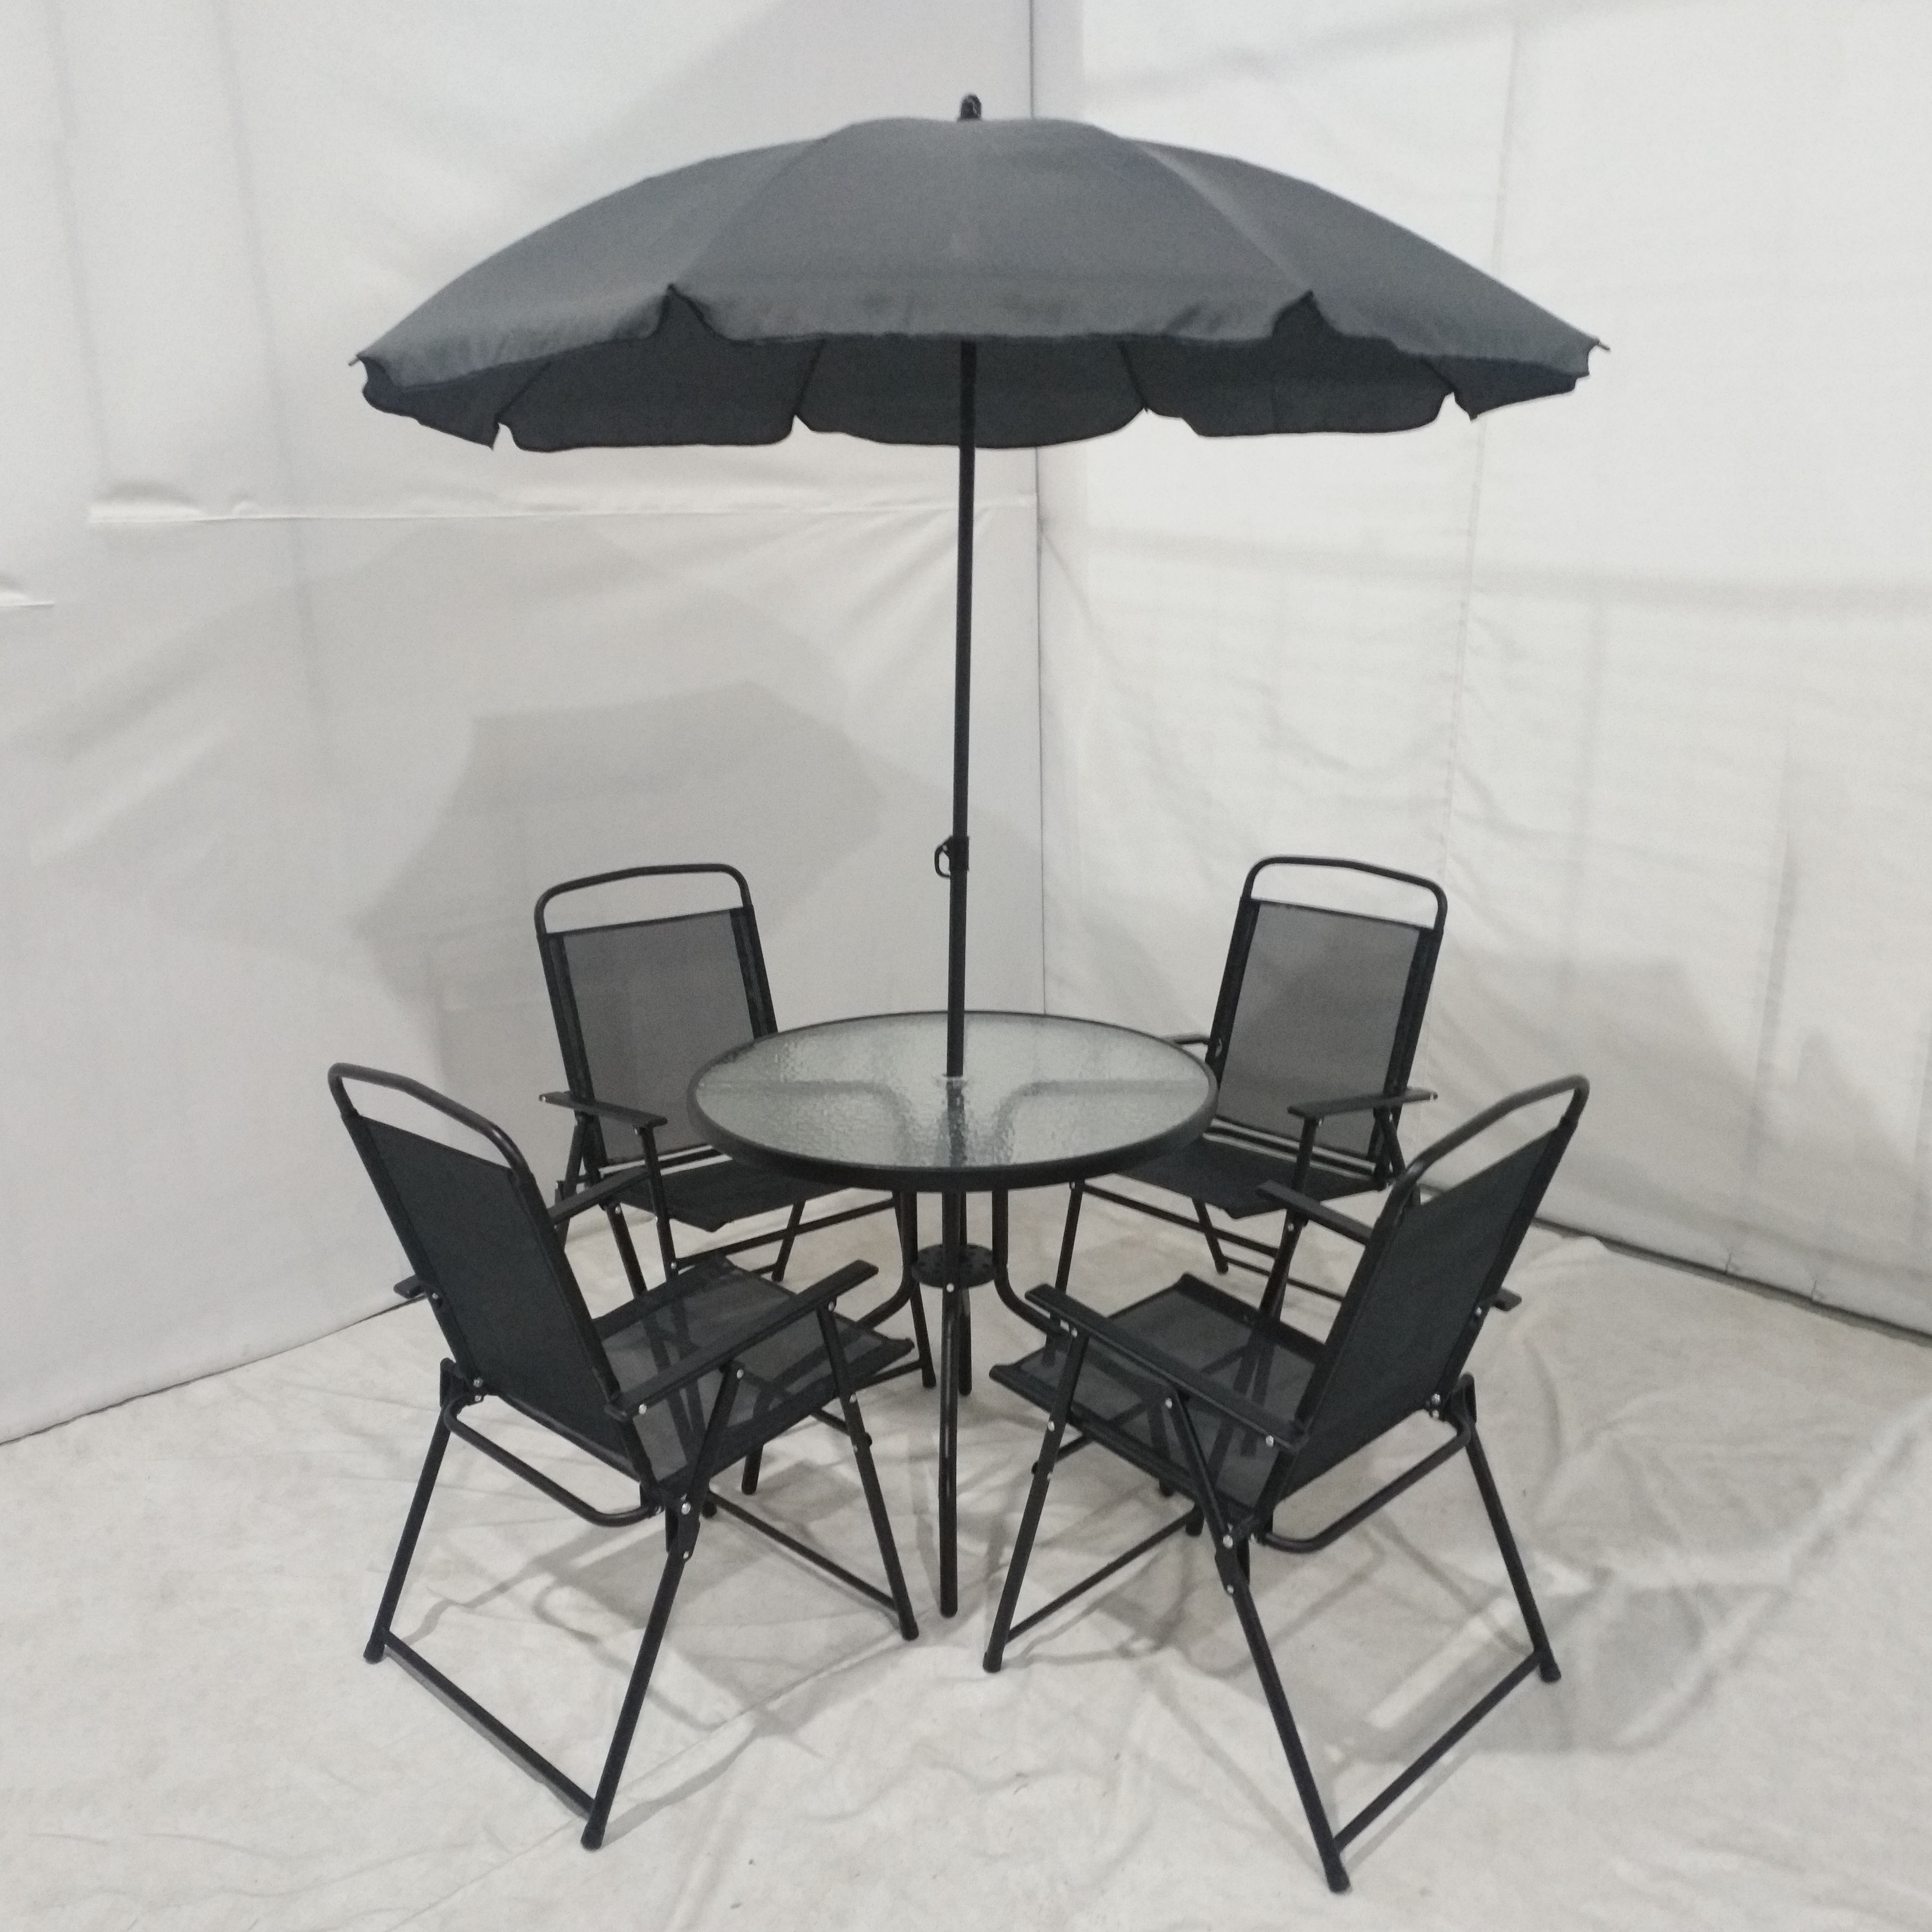 Uplion Outdoor furniture 4pcs garden table and chair set with umbrella patio dining set